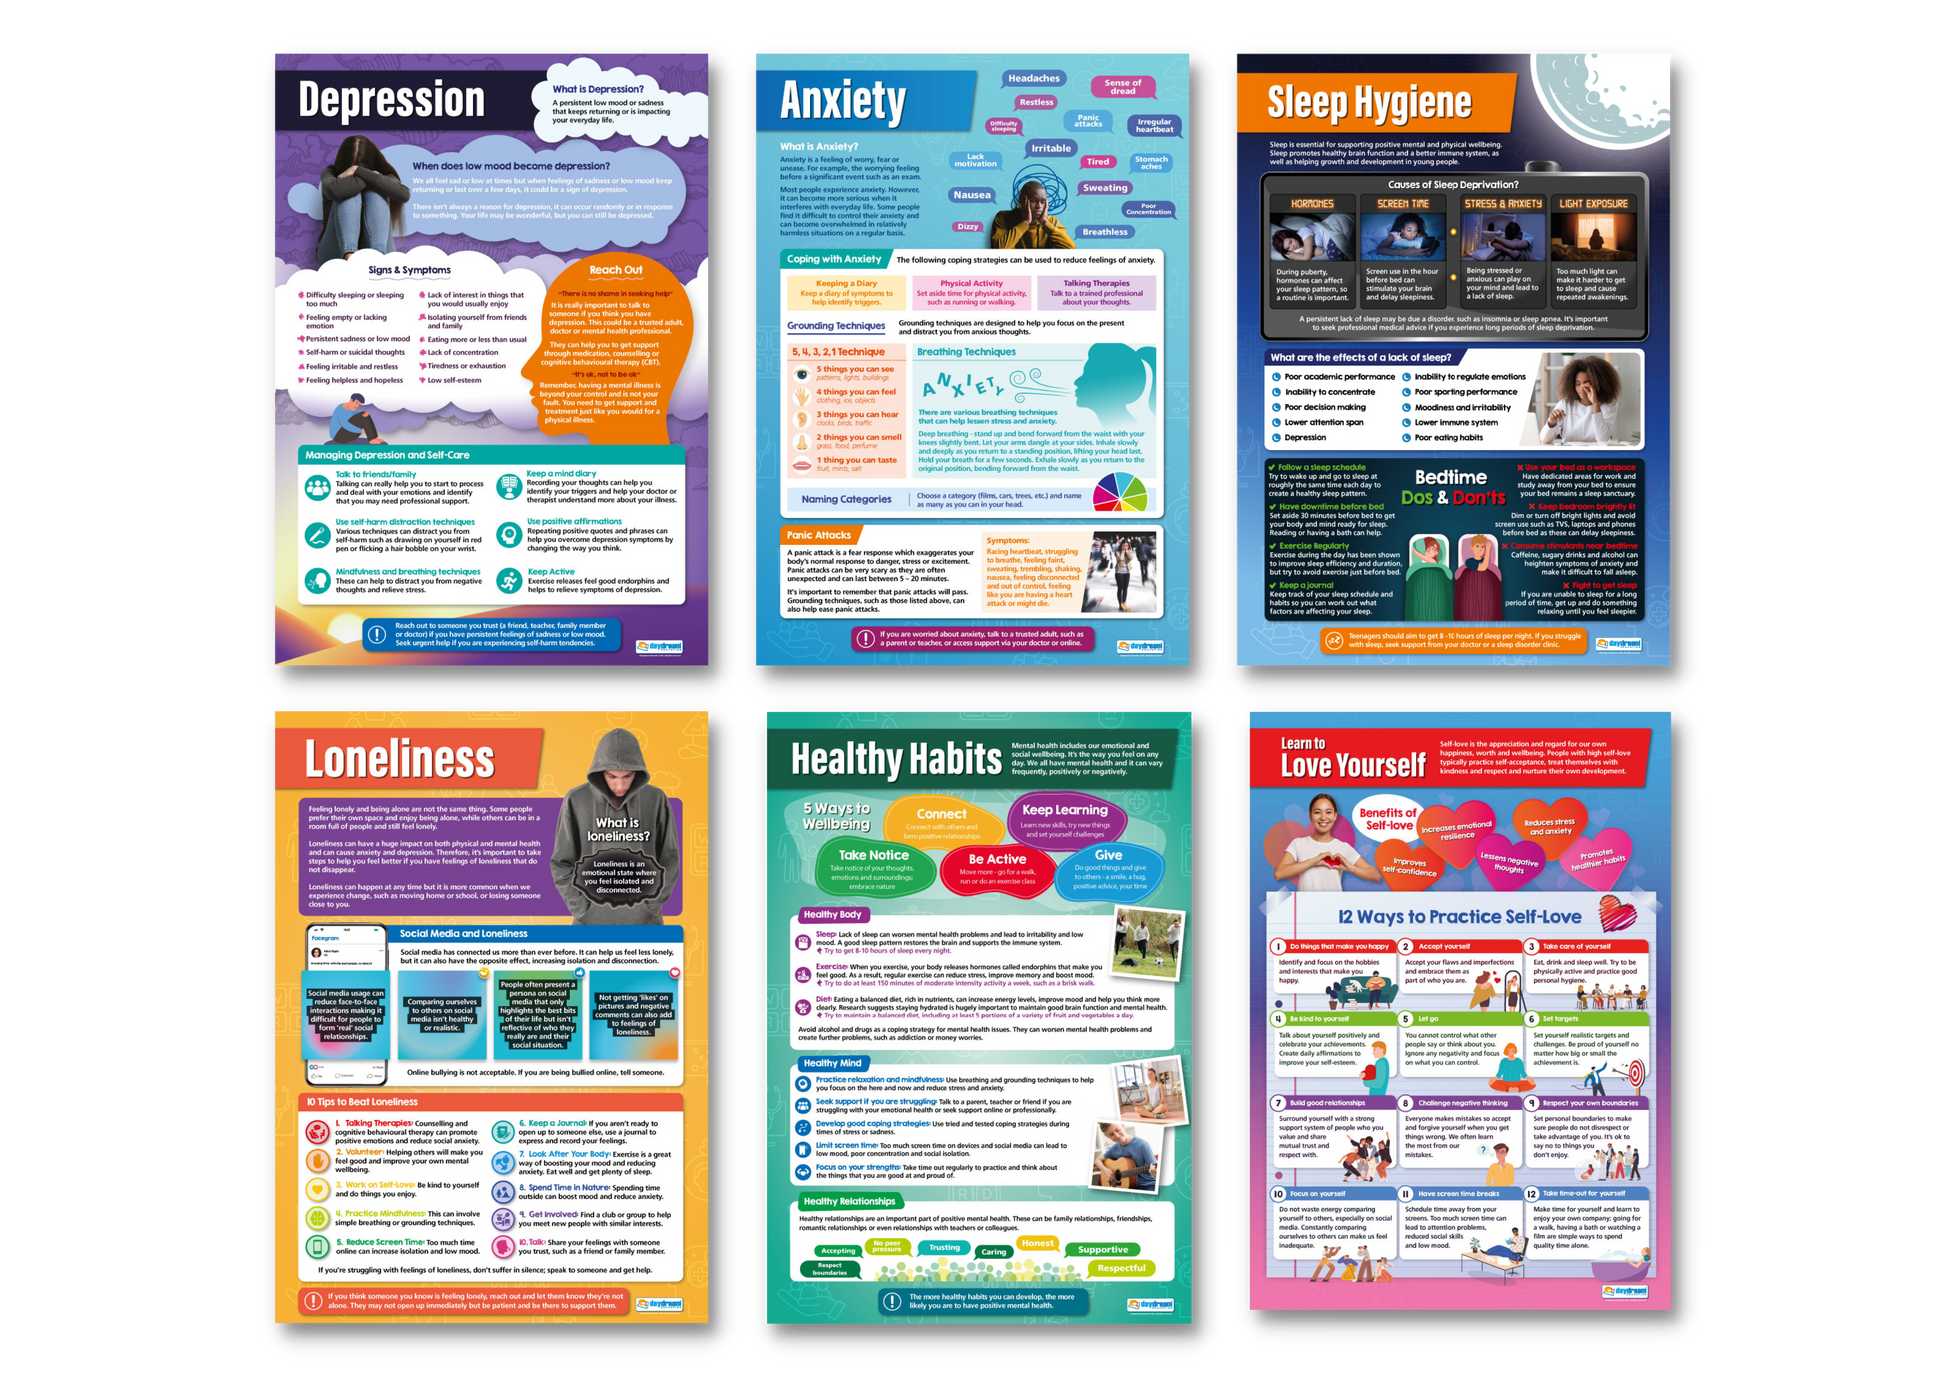 Wellbeing Educational Poster, Mental Health Posters, Mental Health Awareness in Schools, Anxiety Management Resources for Students, School Wellbeing Tools, Supporting Student Mental Health, Mental Health Education Resources for Schools, Depression Awareness Poster, Supporting Students with Depression, Counselling Office Wellbeing Tools, Promoting Mental Health in Schools